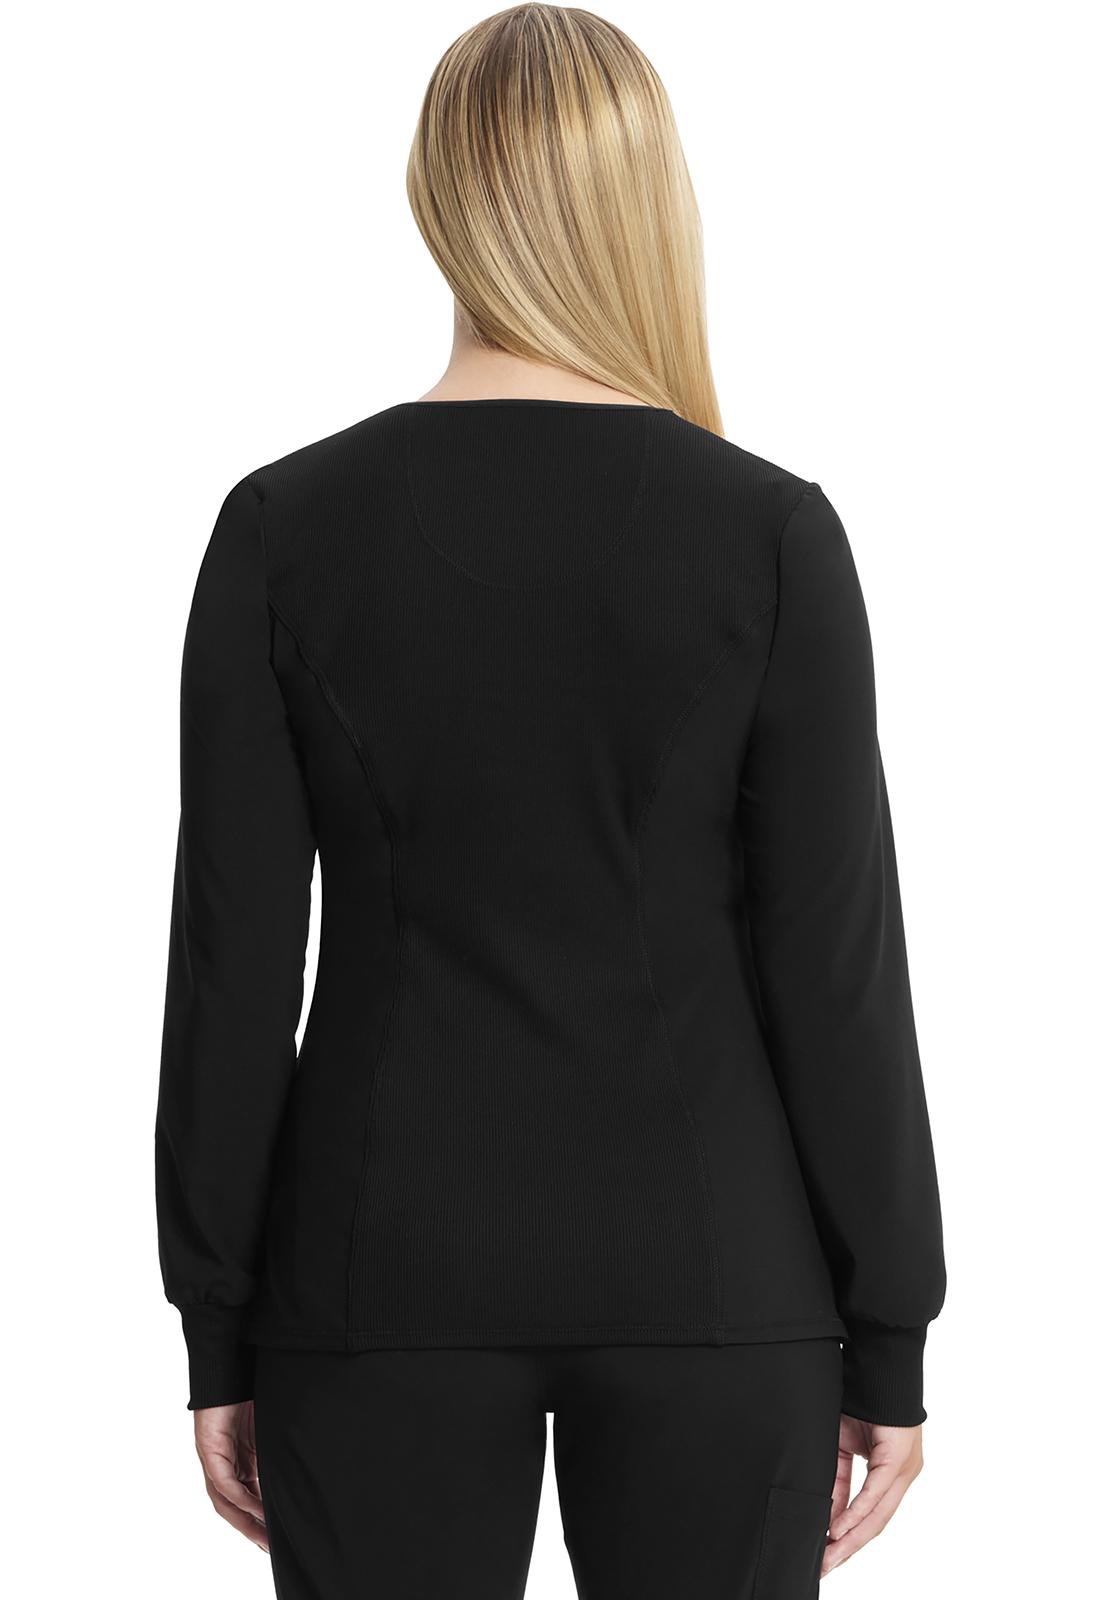 Buy Infinity Long Sleeve Round Neck Top - CU_Infinity Online at Best price  - PA